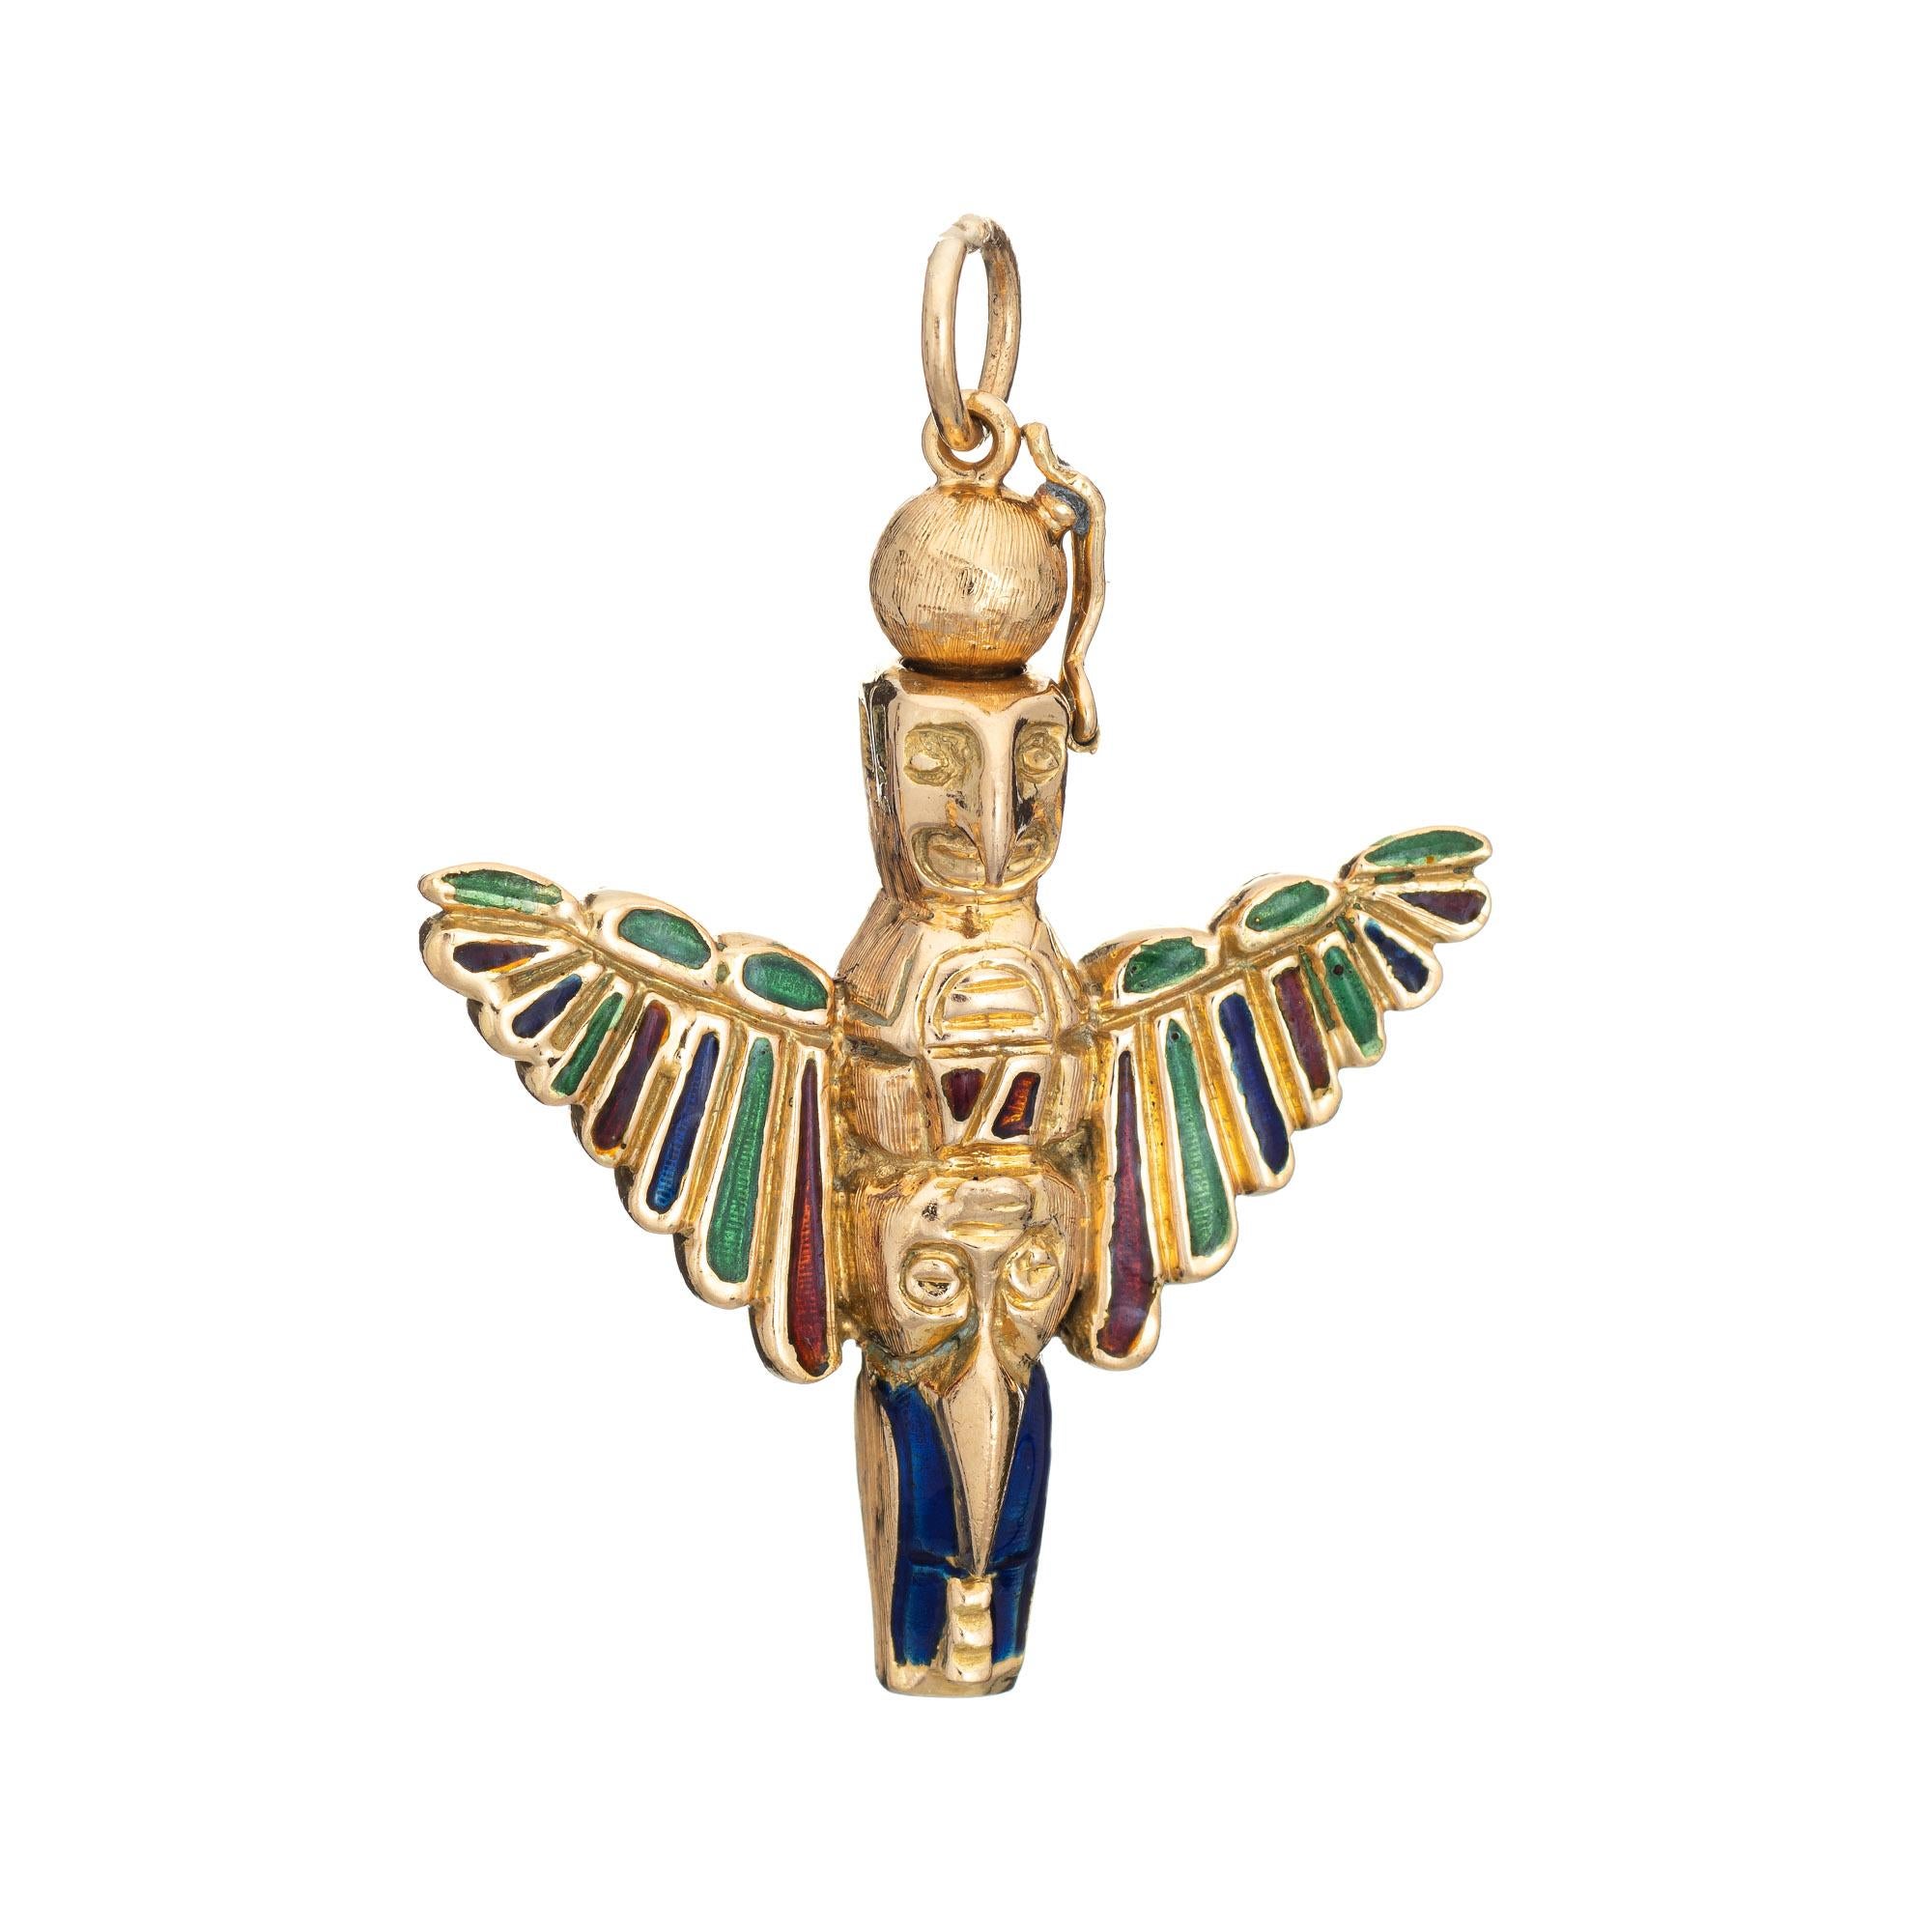 Finely detailed vintage Aztec pendant crafted in 18k yellow gold.  

Blue, green and red enamel is set into the wings.

The finely detailed pendant is double sided with what we believe is an Aztec inspired rendering on an eagle. The wings are